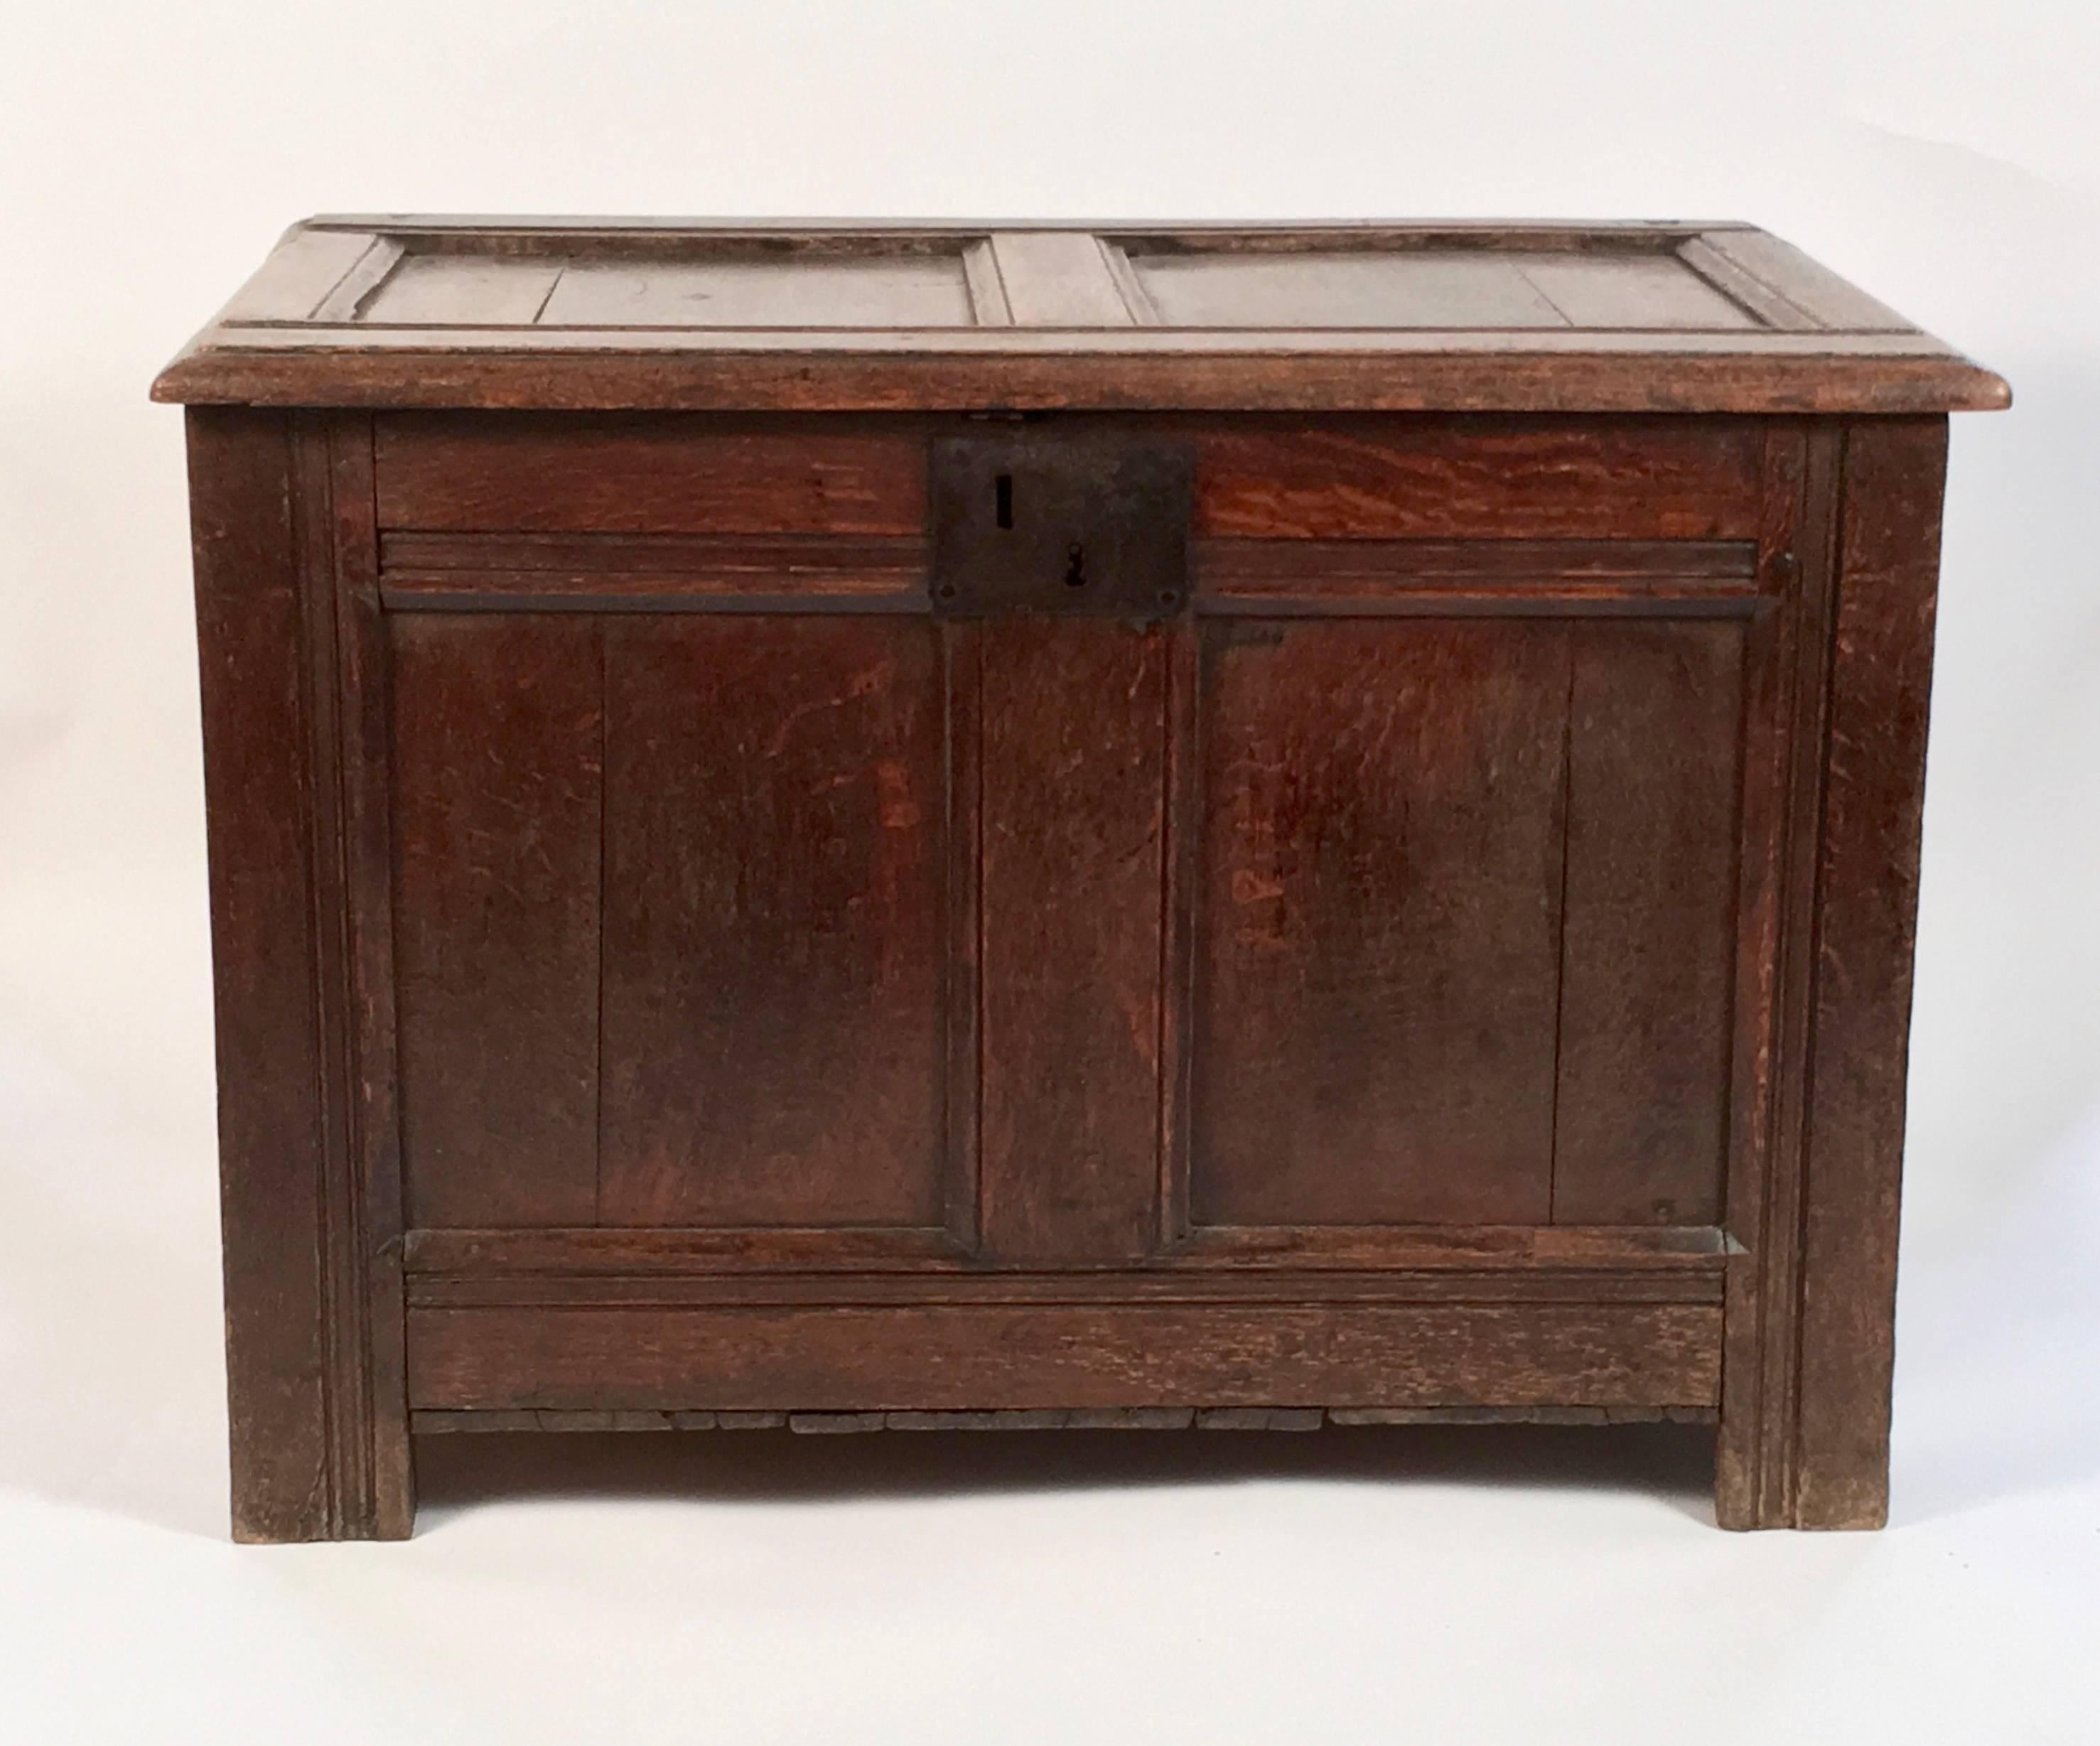 A wonderfully small sized English 17th century paneled oak chest, of rectangular form, the paneled lift top opening to provide storage space. Rich color, great character. Perfect size for a coffee table or at the end of a bed.